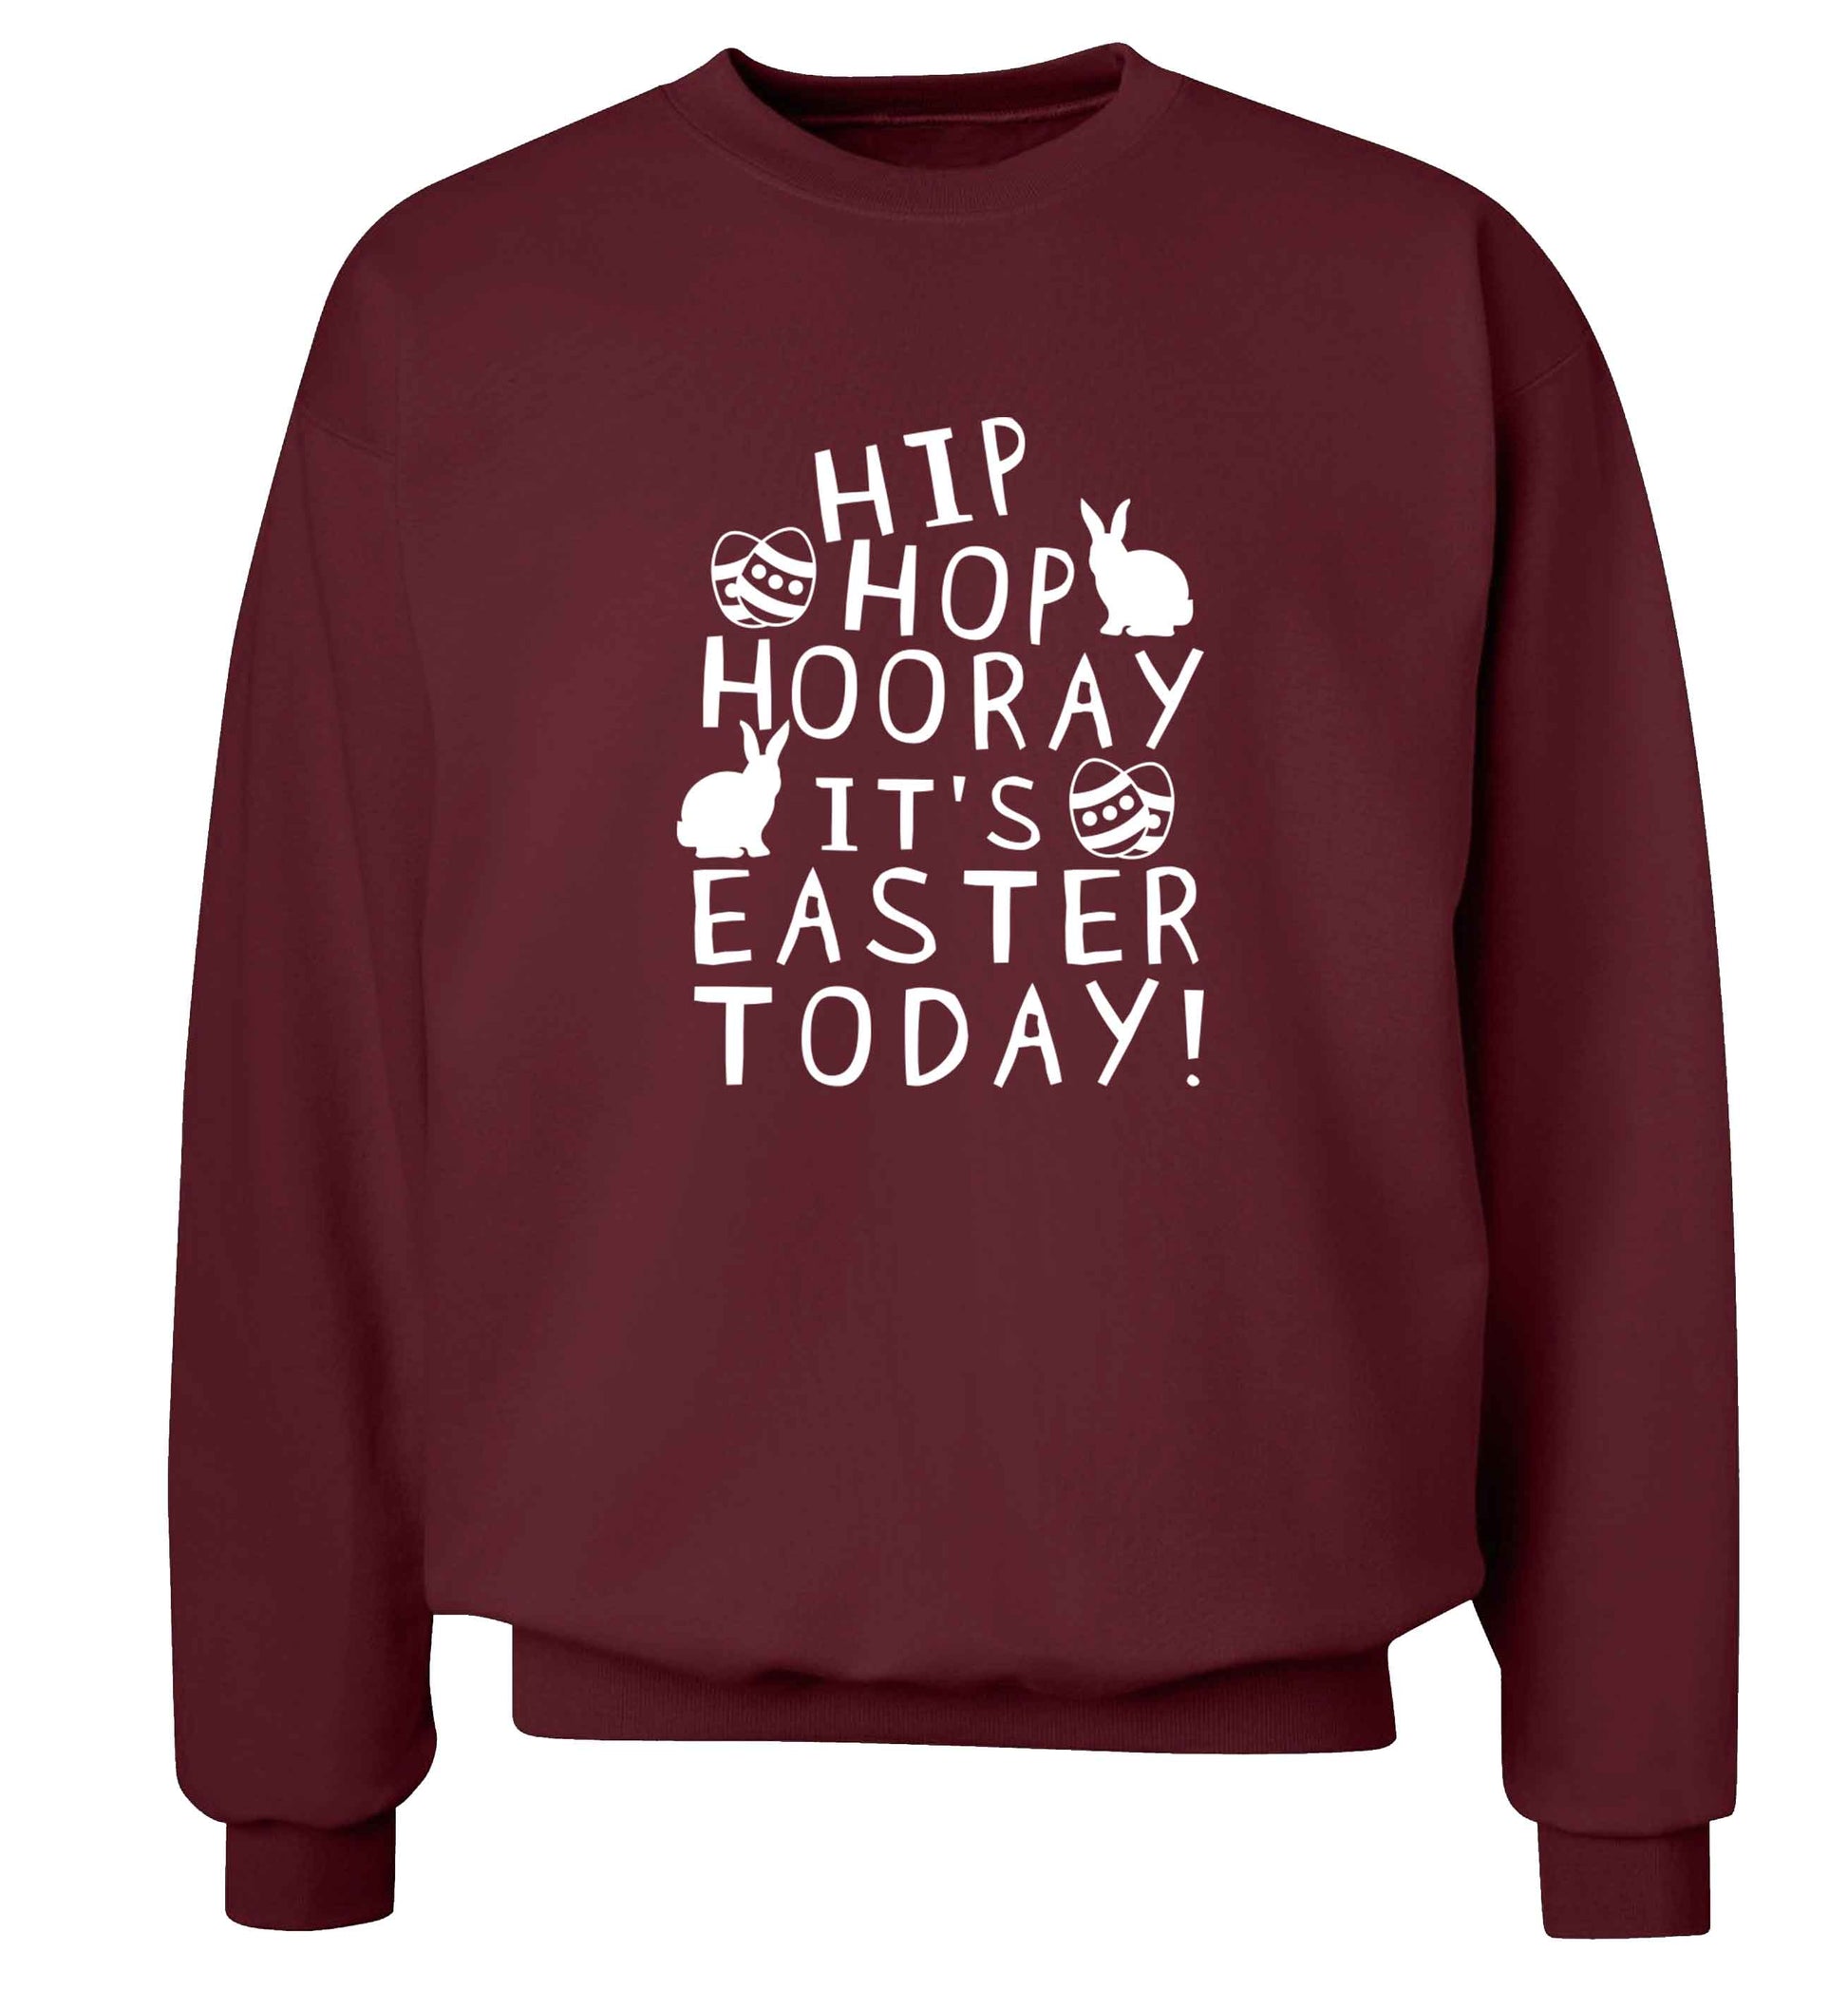 Hip hip hooray it's Easter today! adult's unisex maroon sweater 2XL